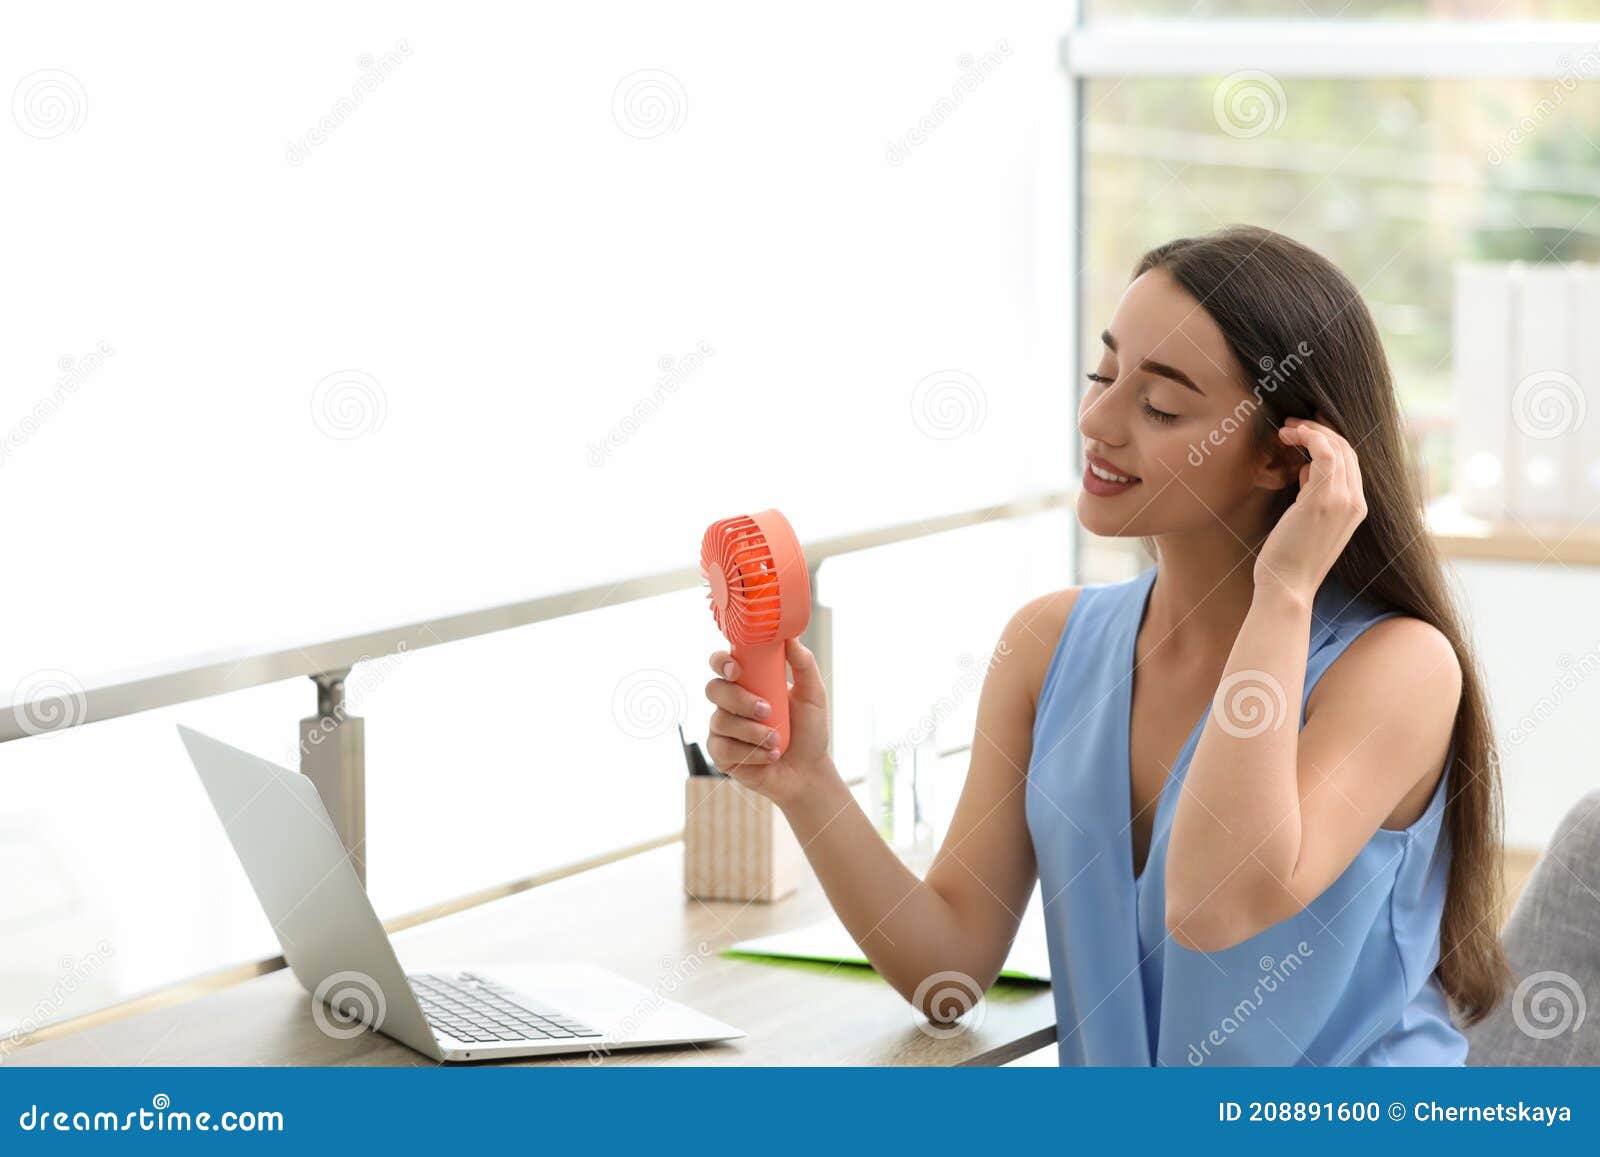 young woman enjoying air flow from portable fan at workplace, space for text. summer heat